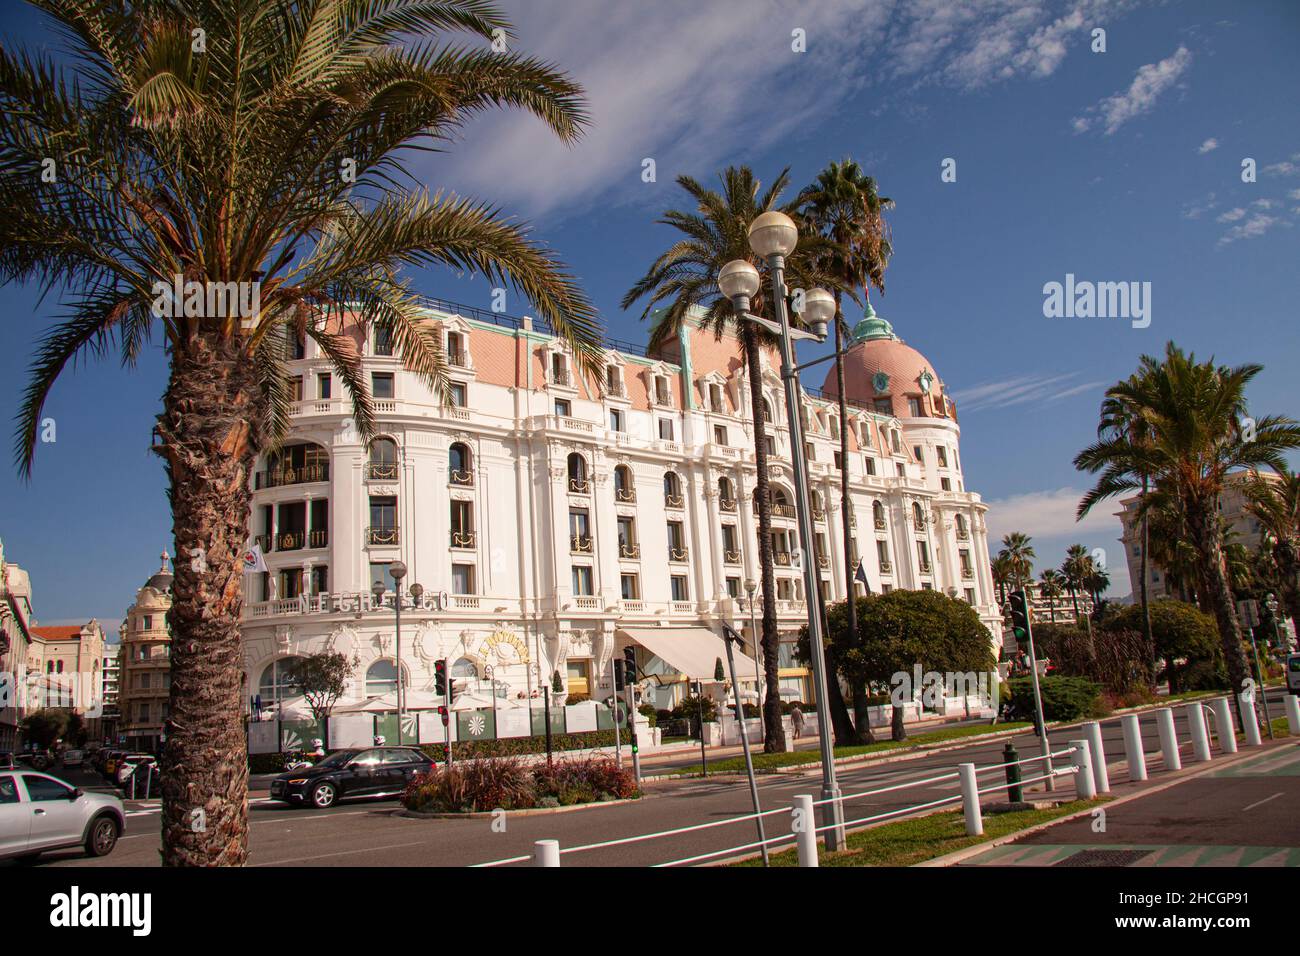 The Negresco Hotel in Nice by the Promenade des Anglais with blue sky at the Mediterranean coast with palm trees in the forground. Nice, France - Sept Stock Photo